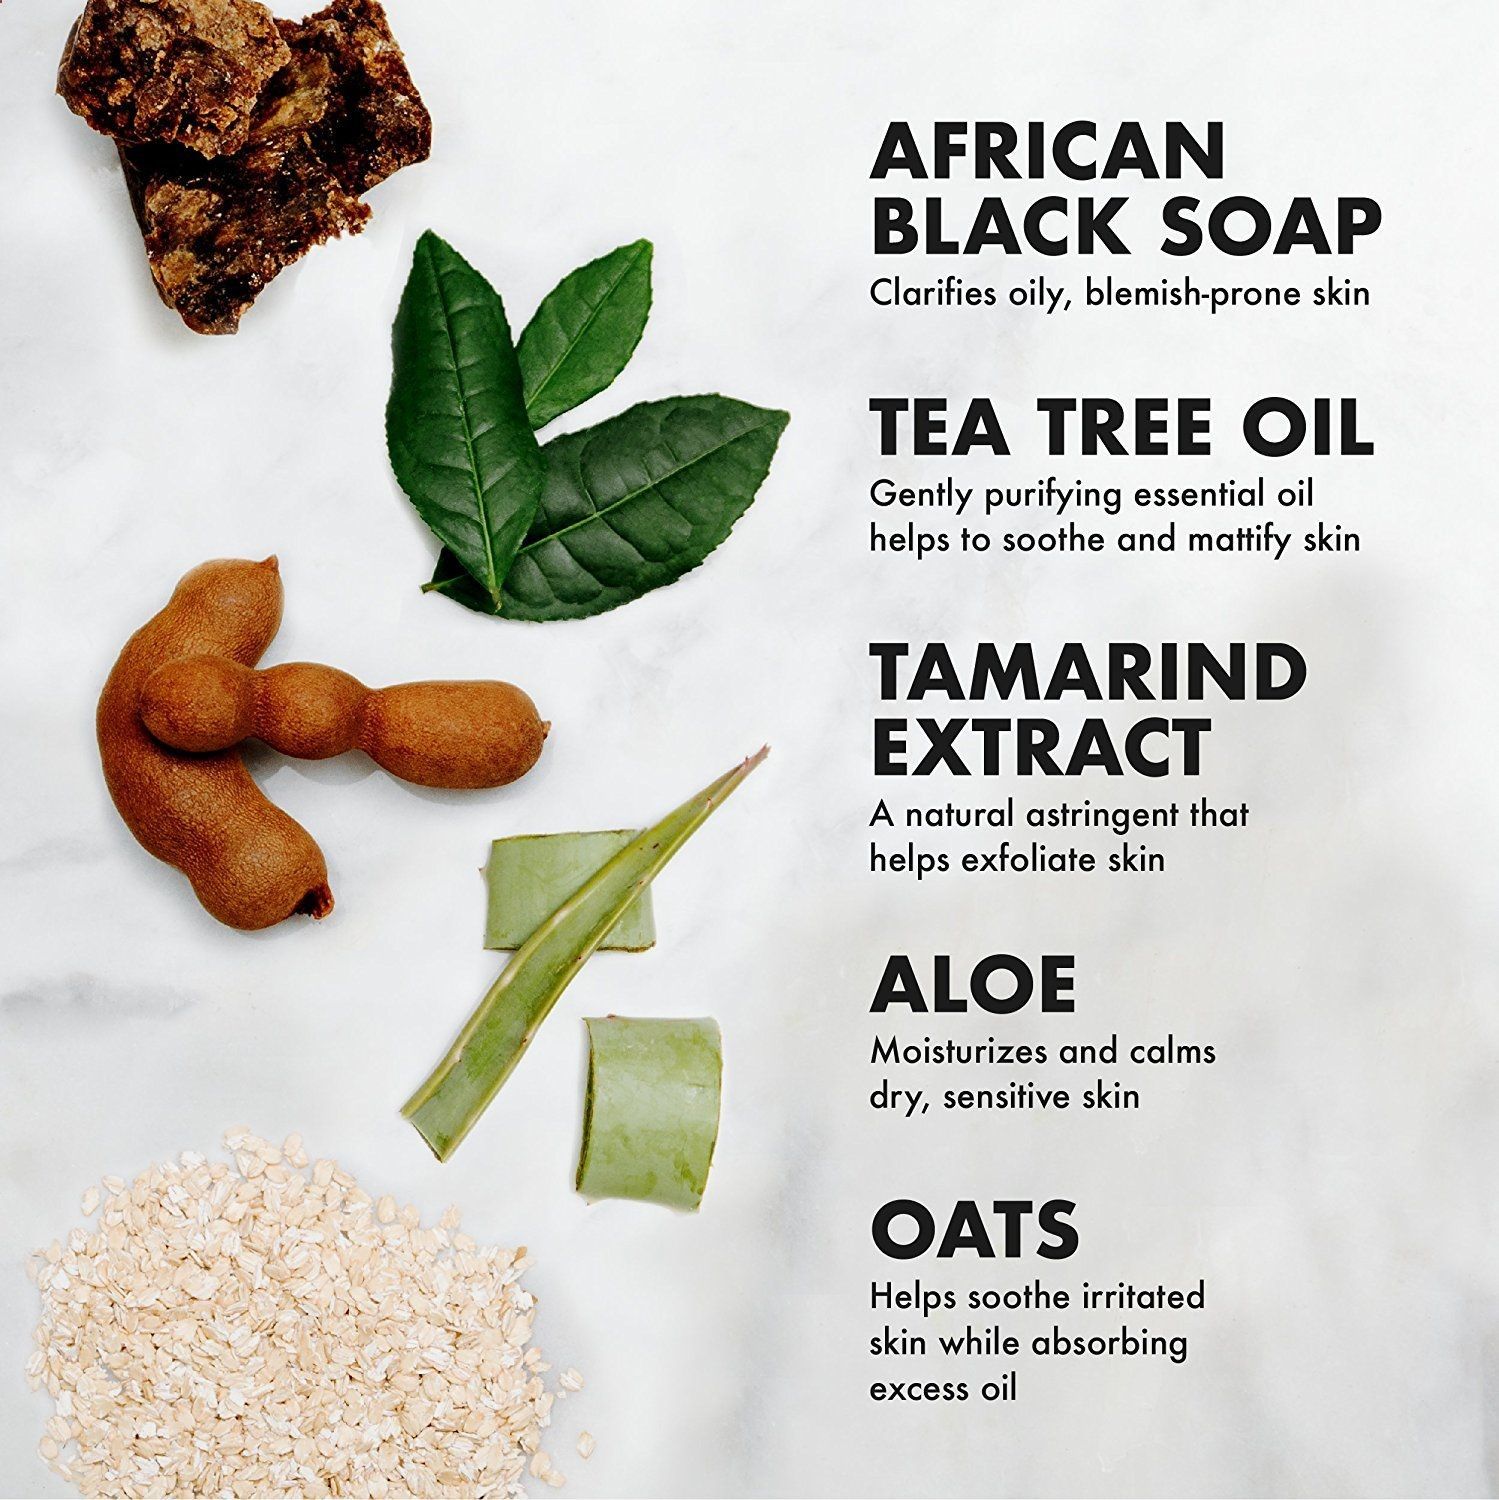 Recently I have been hearing tons about African Black Soap to help with ...